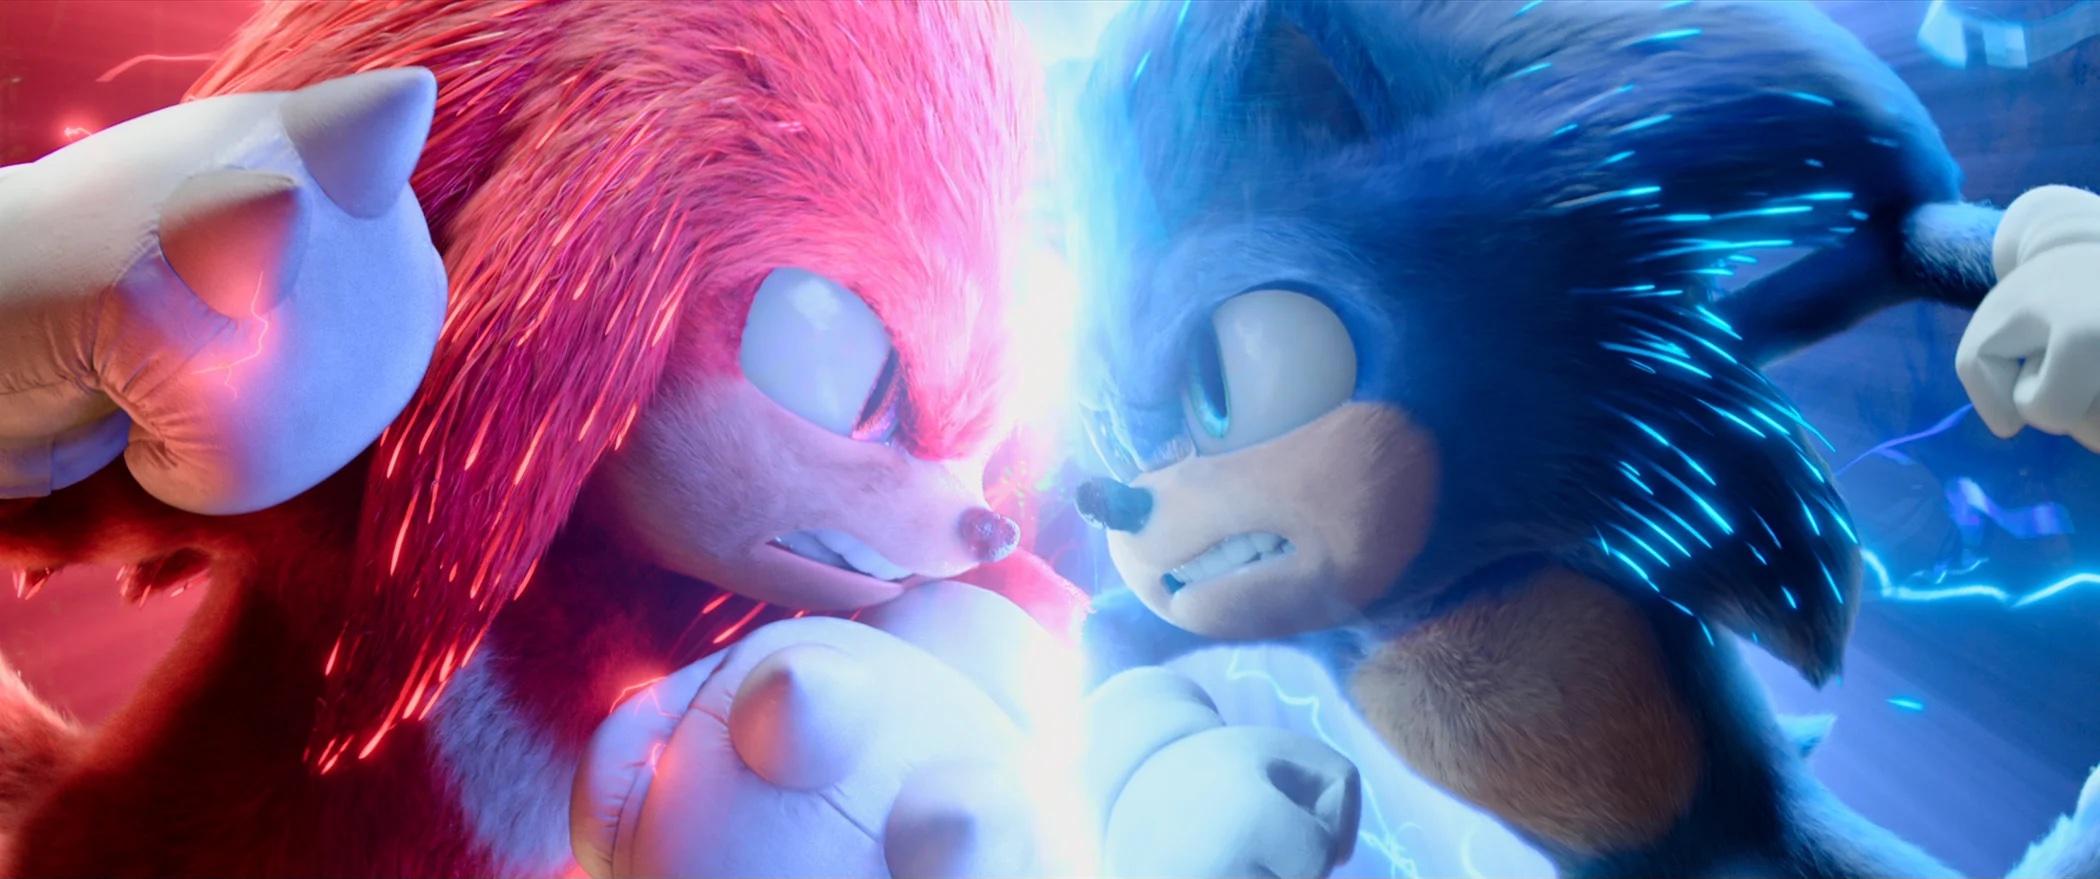 „Sonic the Hedgehog 3“ läuft offiziell bei Paramount Pictures.